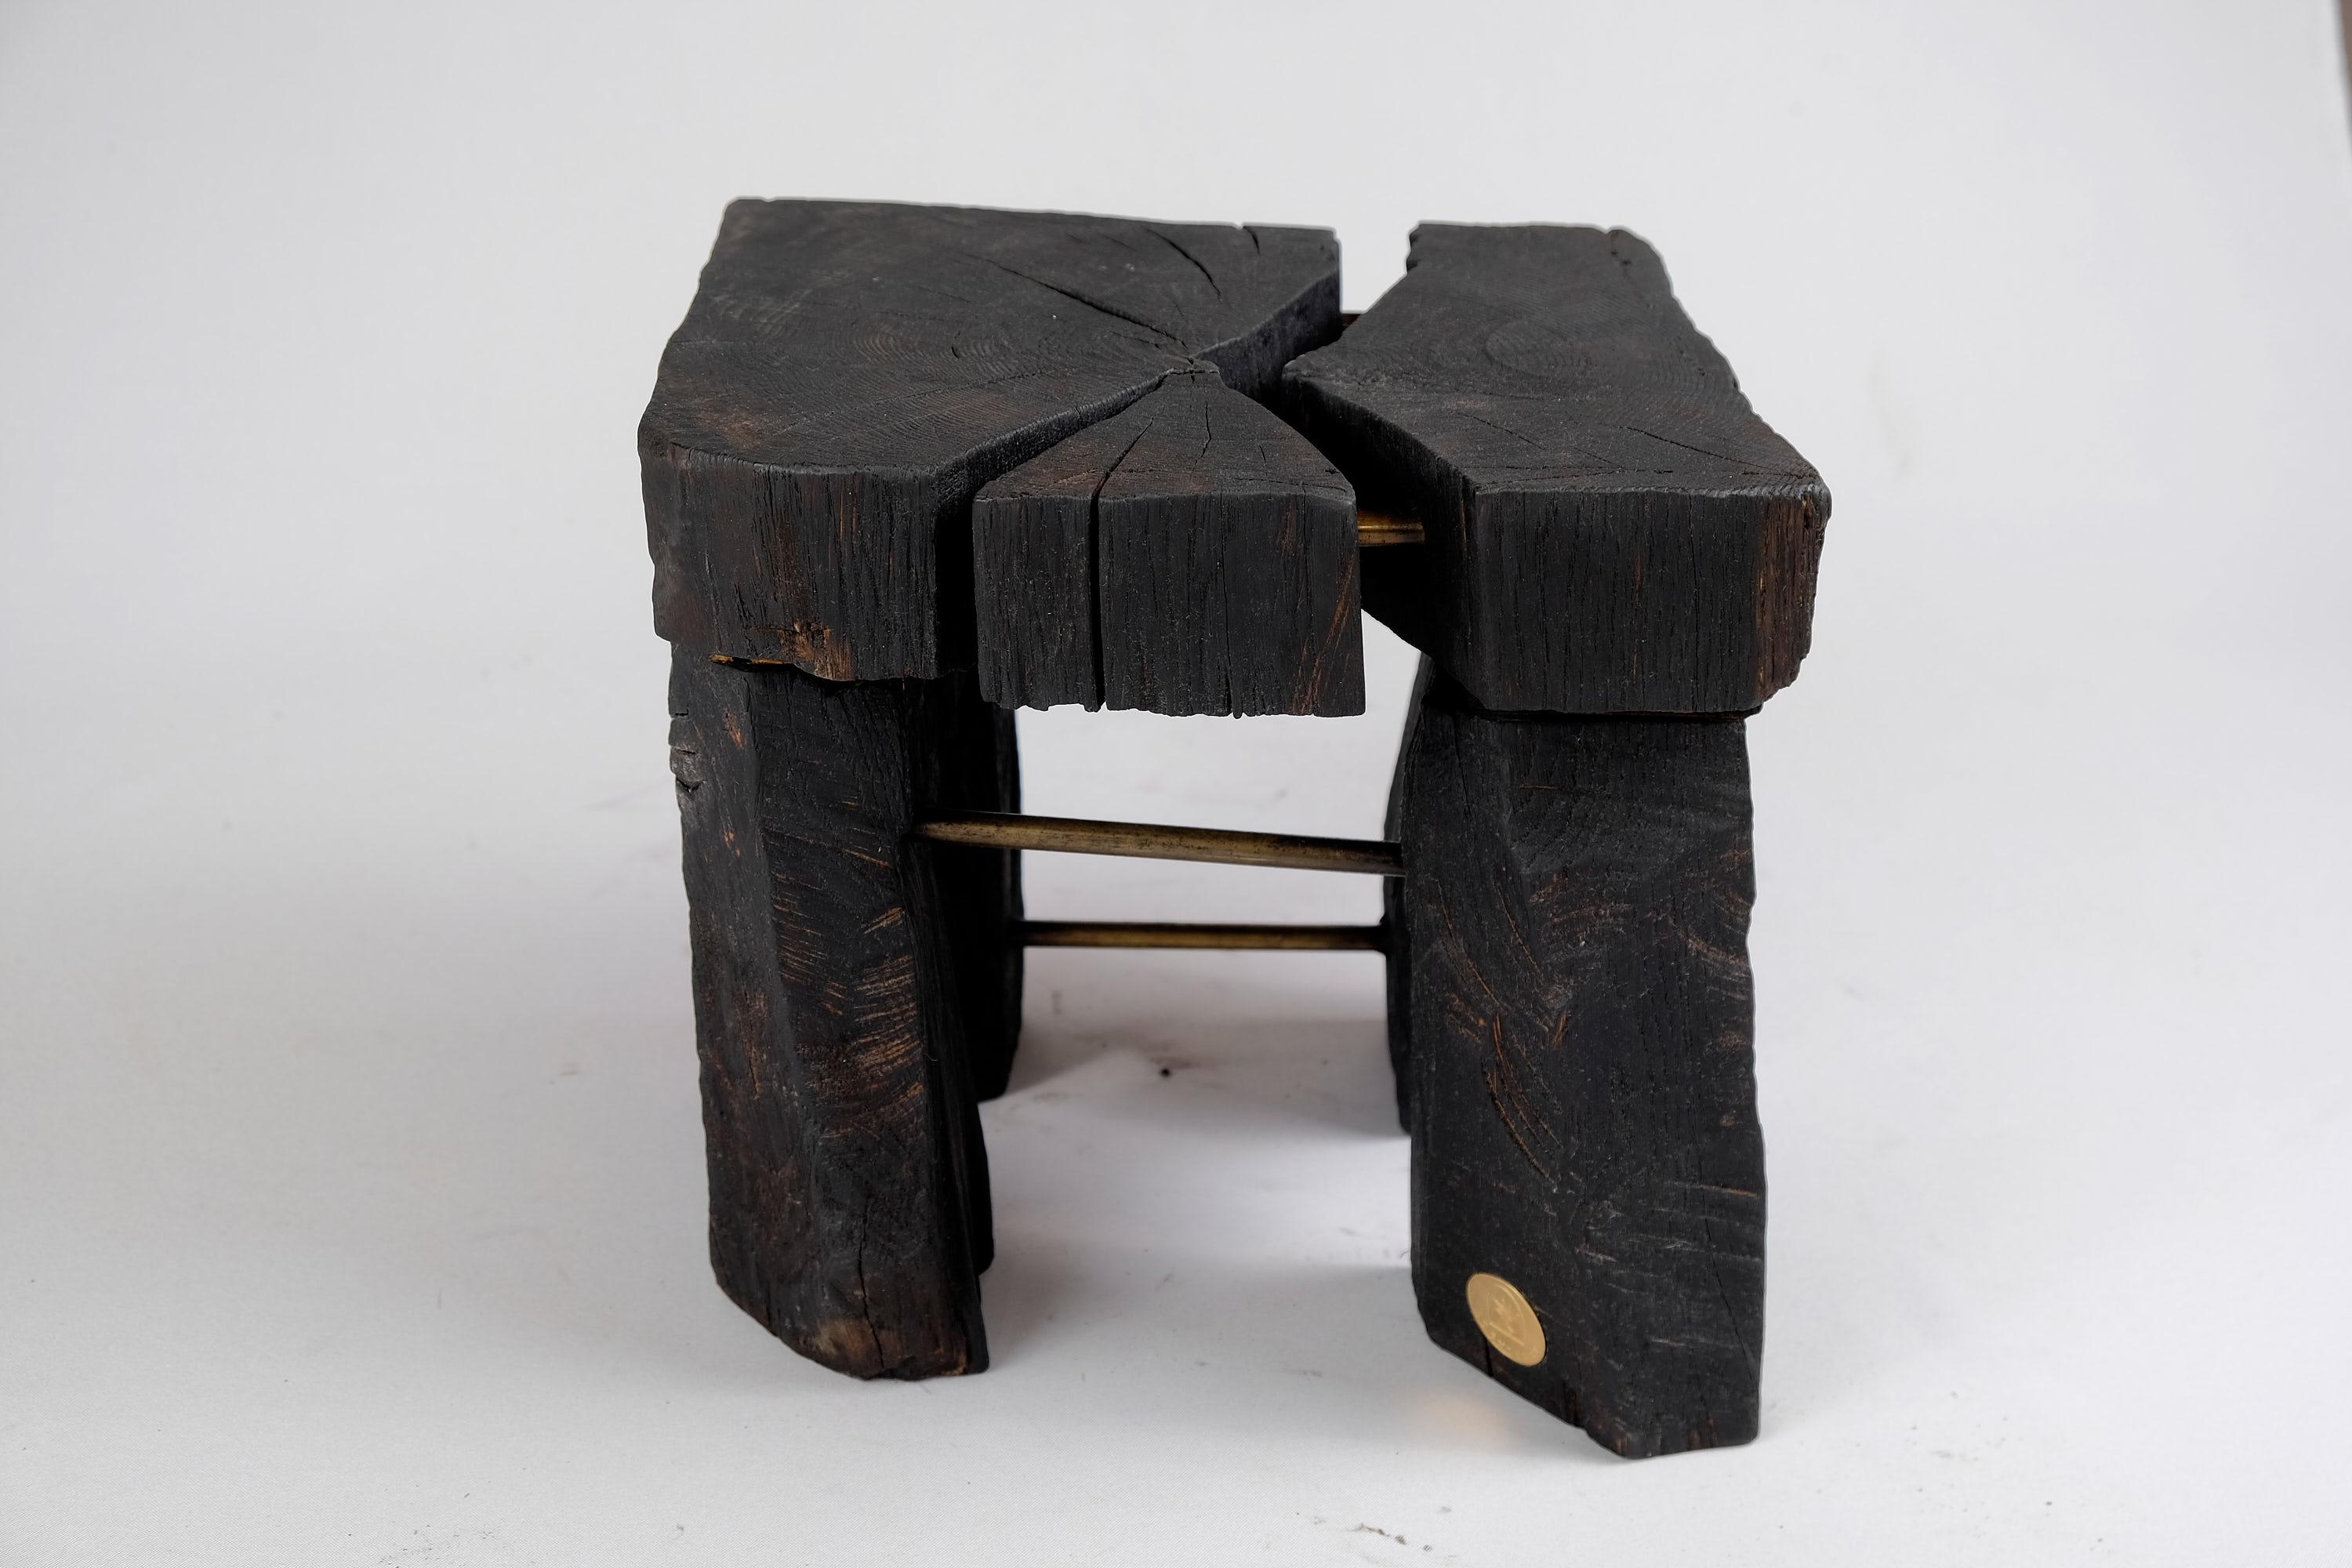 Contemporary Solid Burnt Wood, Side Table, Stool, Wabi Sabi, Chainsaw Carved, Handmade